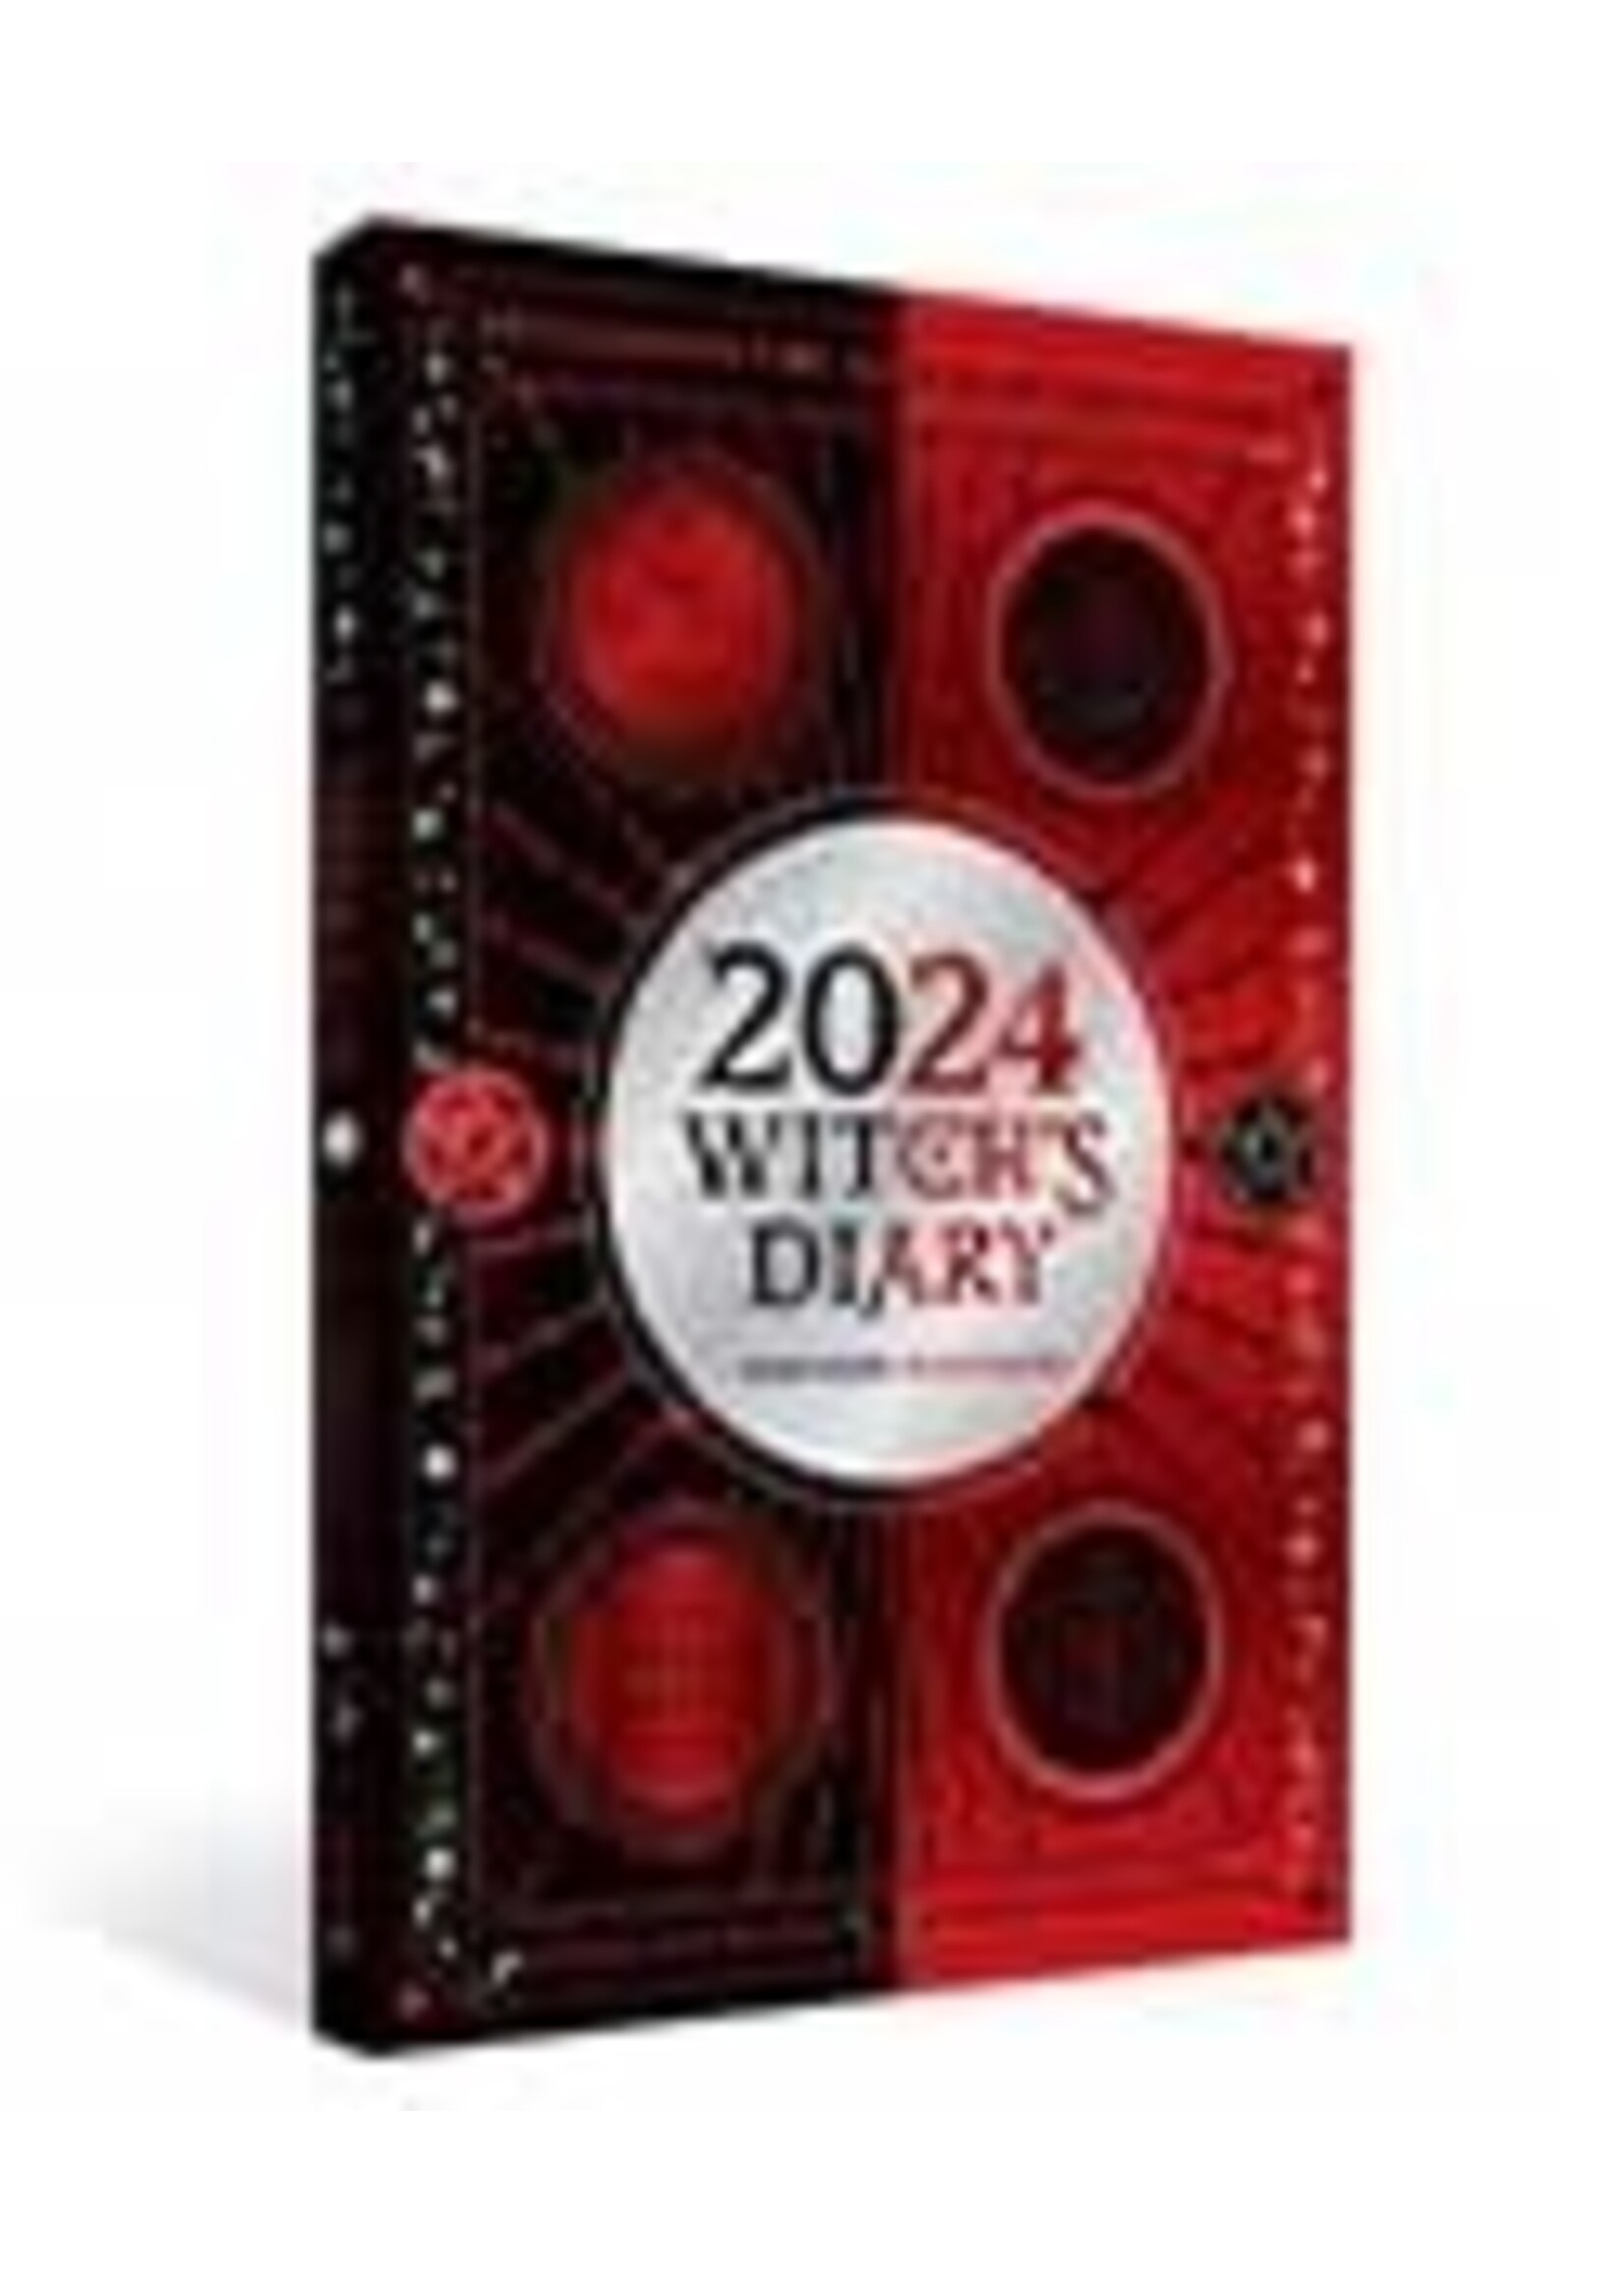 2024 Witches Diary